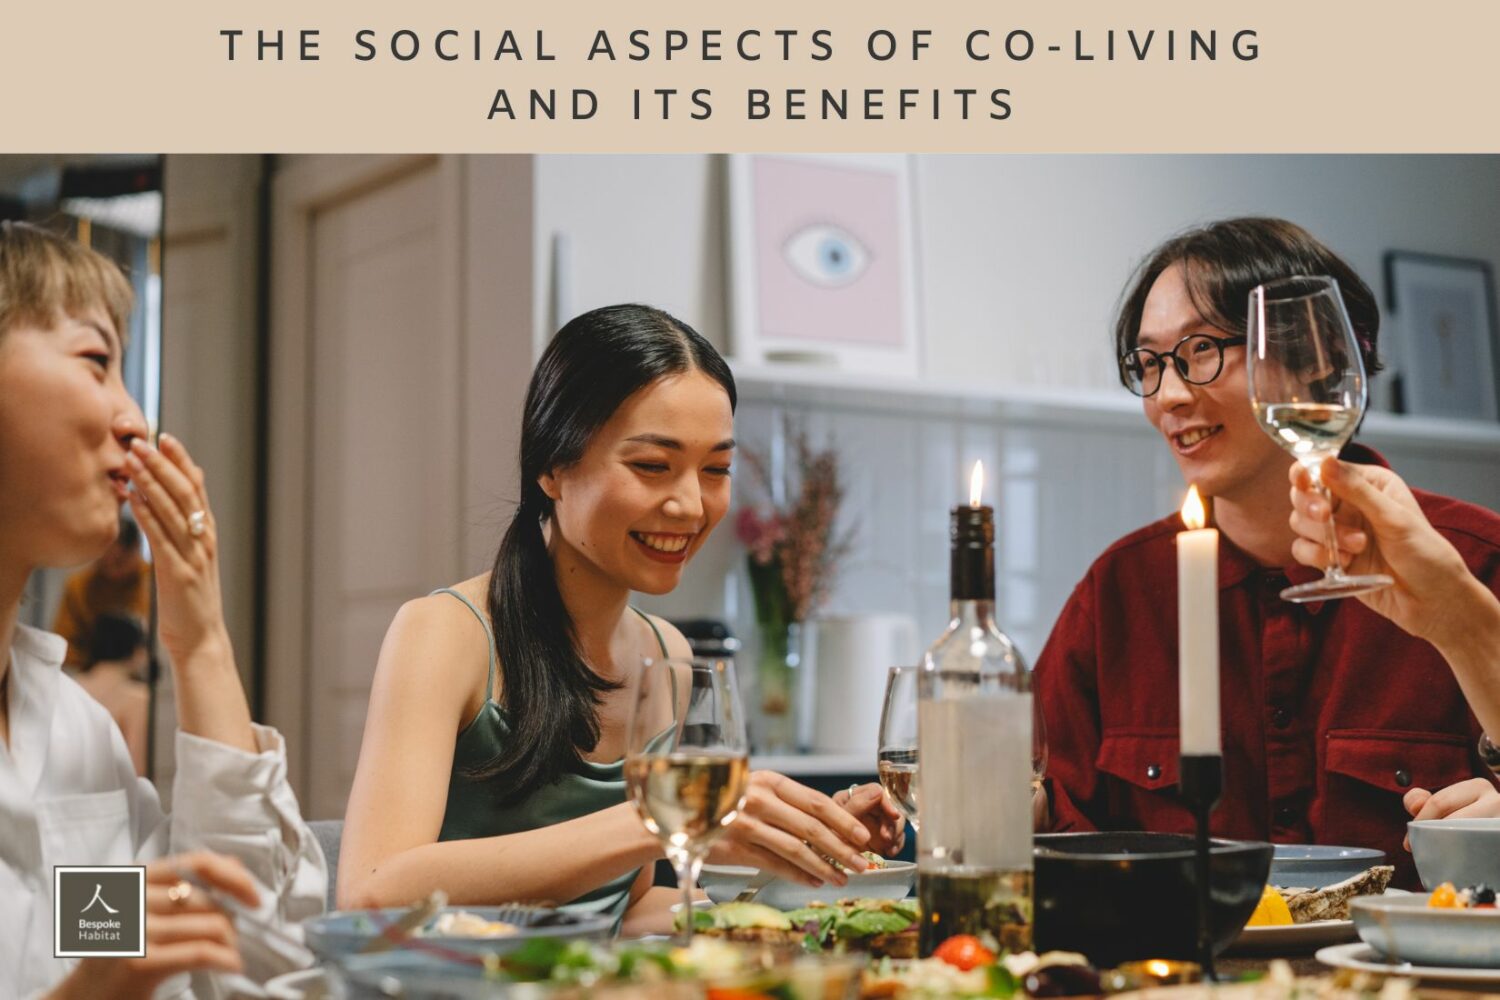 The Social Aspects of Co-living and its Benefits